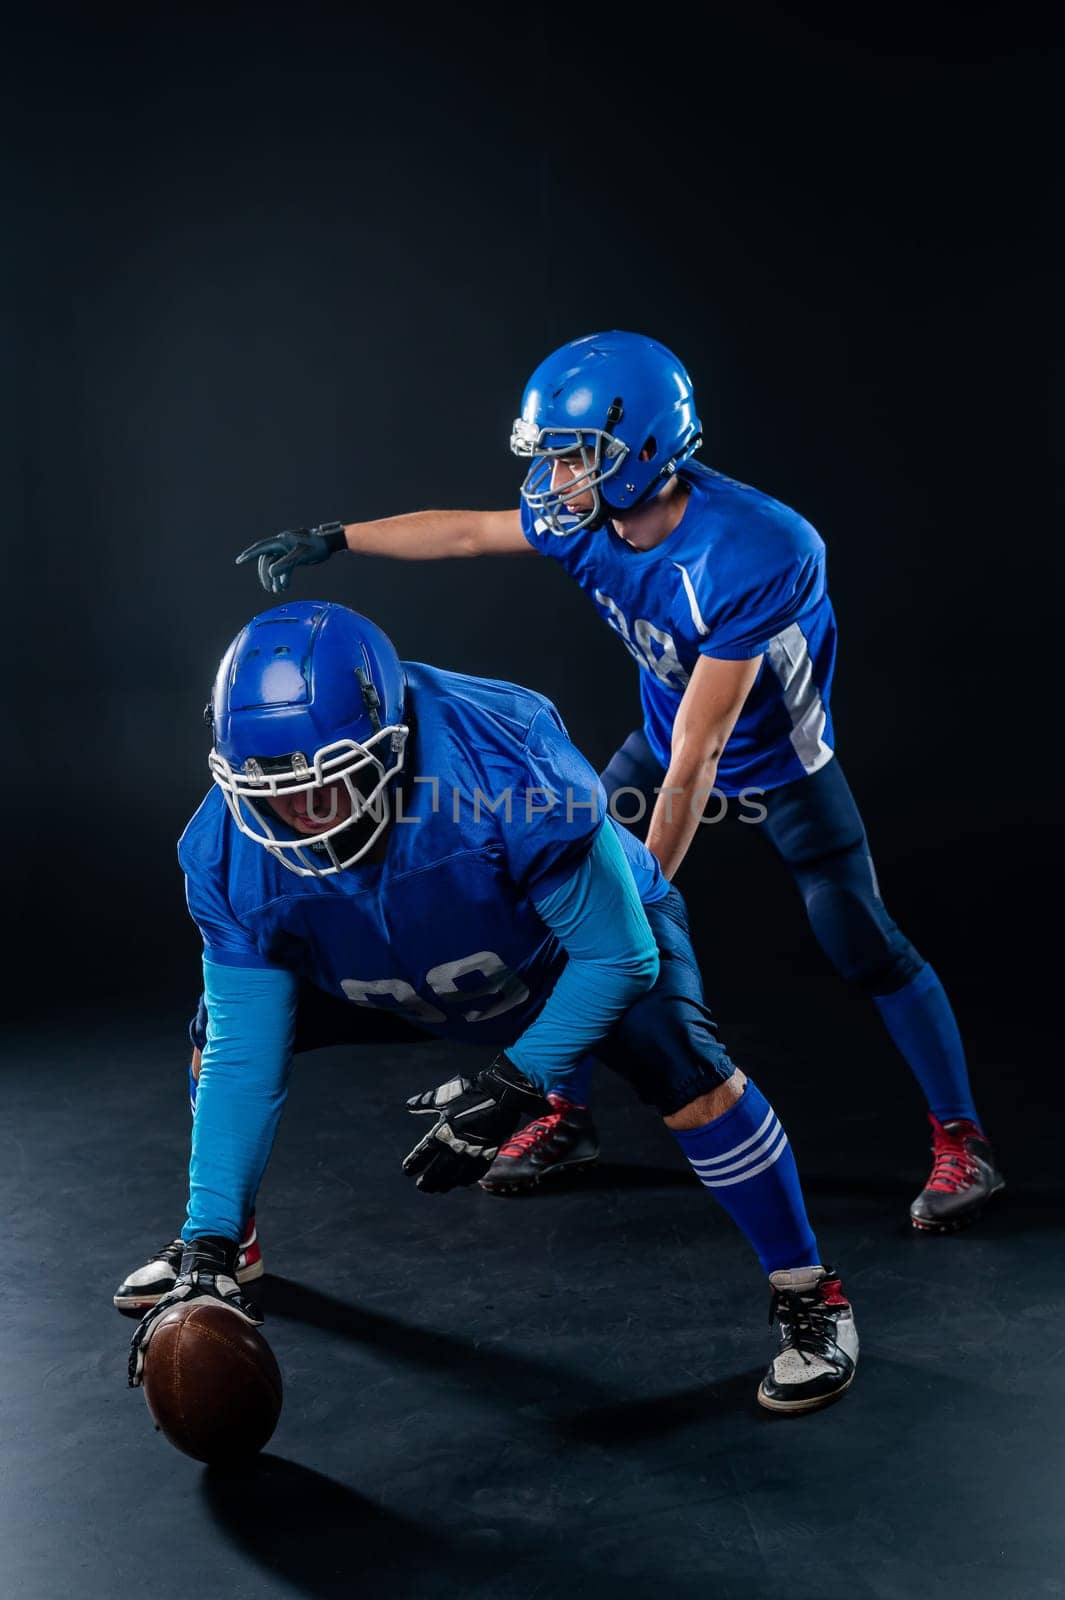 Two American football players are ready to start the game on a black background. by mrwed54